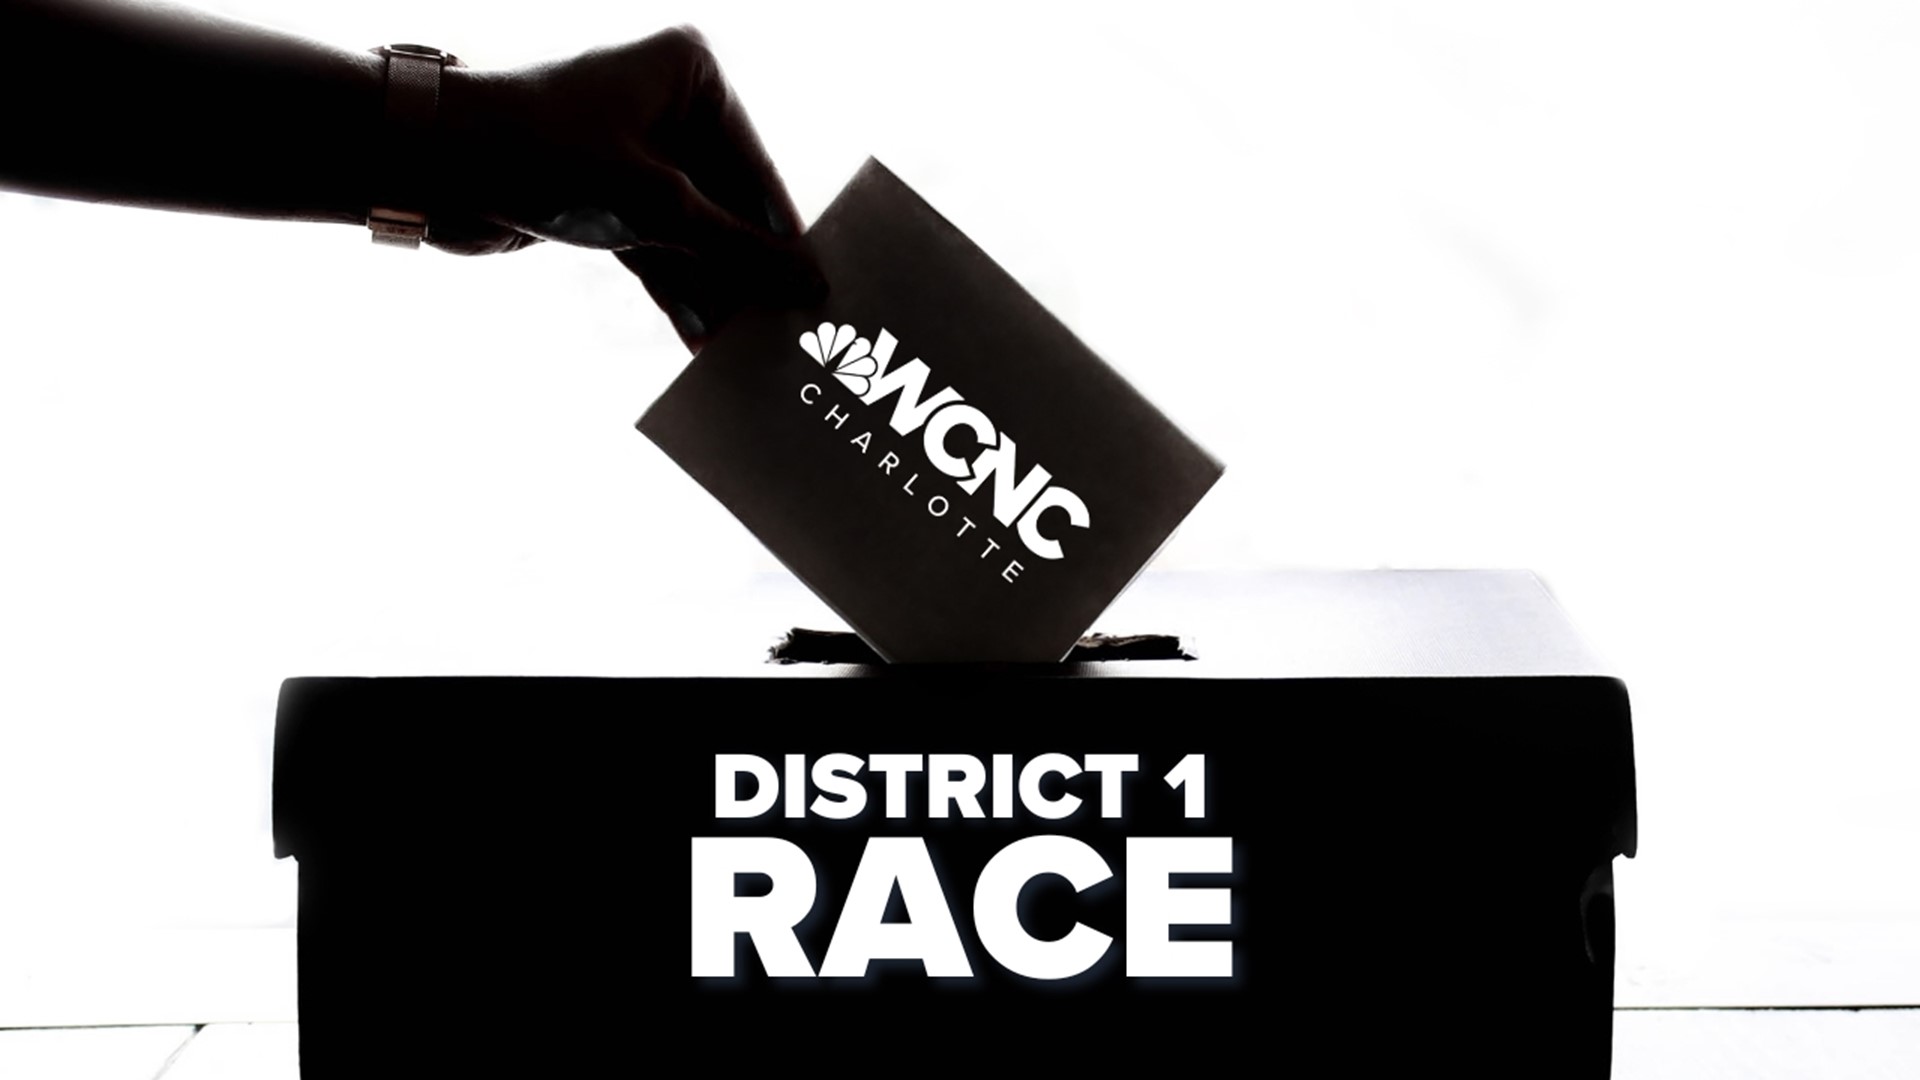 The Republican Party has organized to get more of its party involved in school board races.